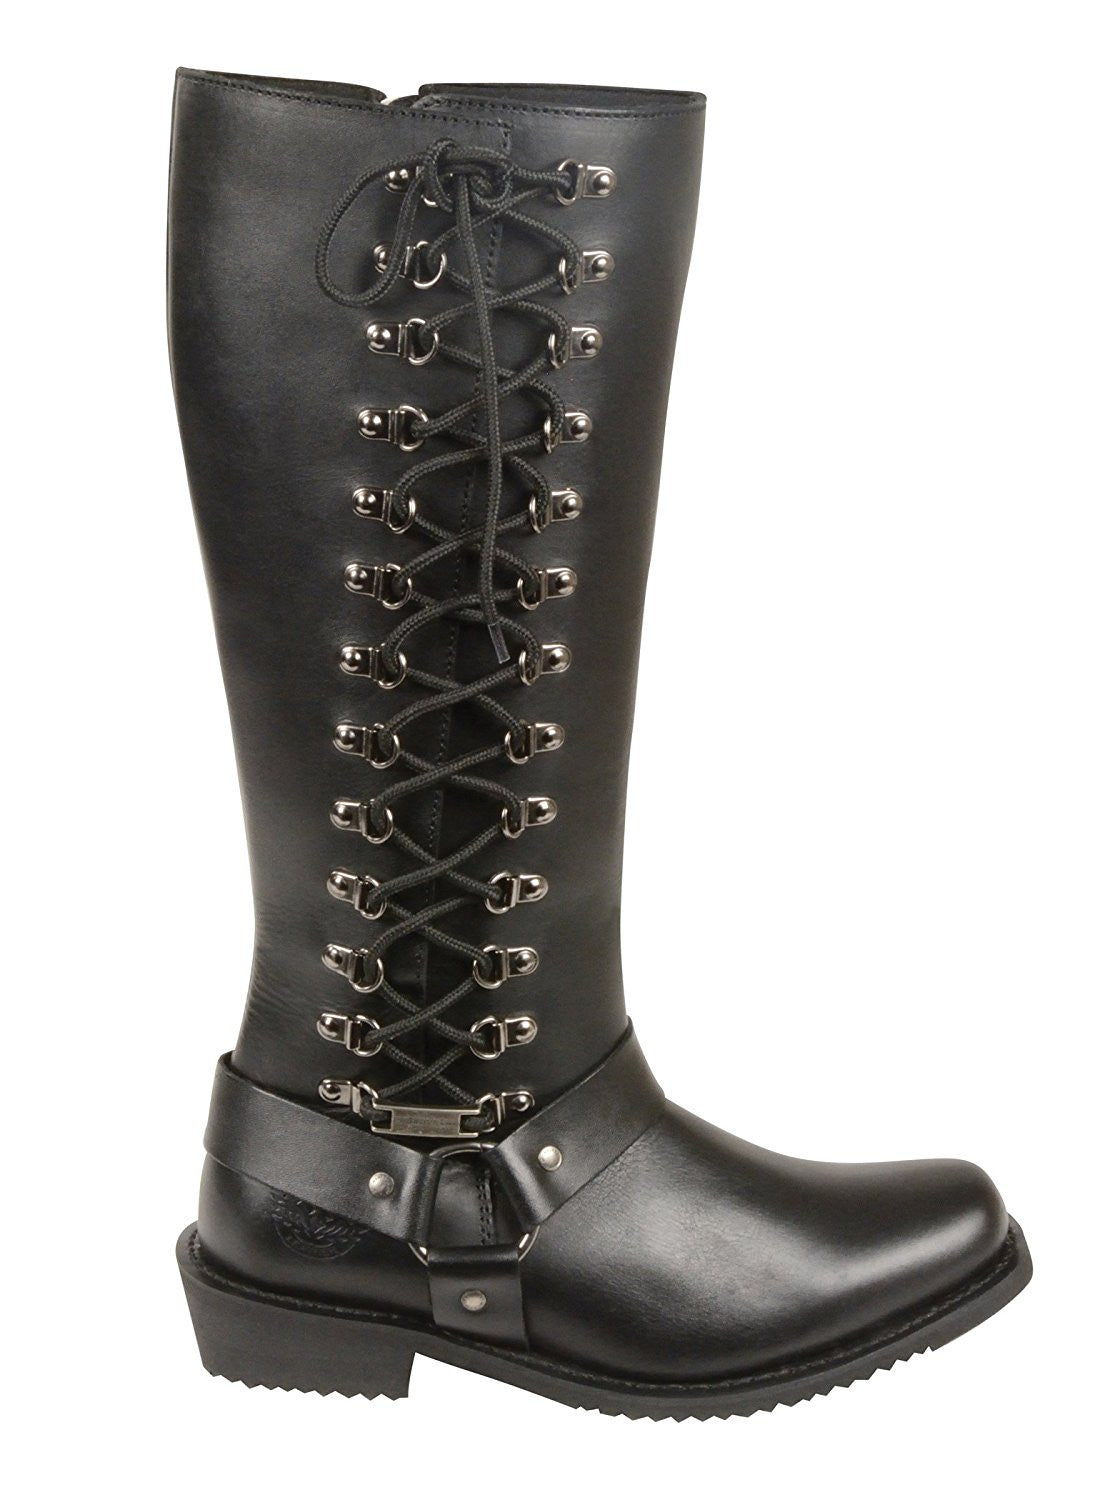 Milwaukee Leather Women's Tall Boots with Side Lacing | Maine-Line Leather